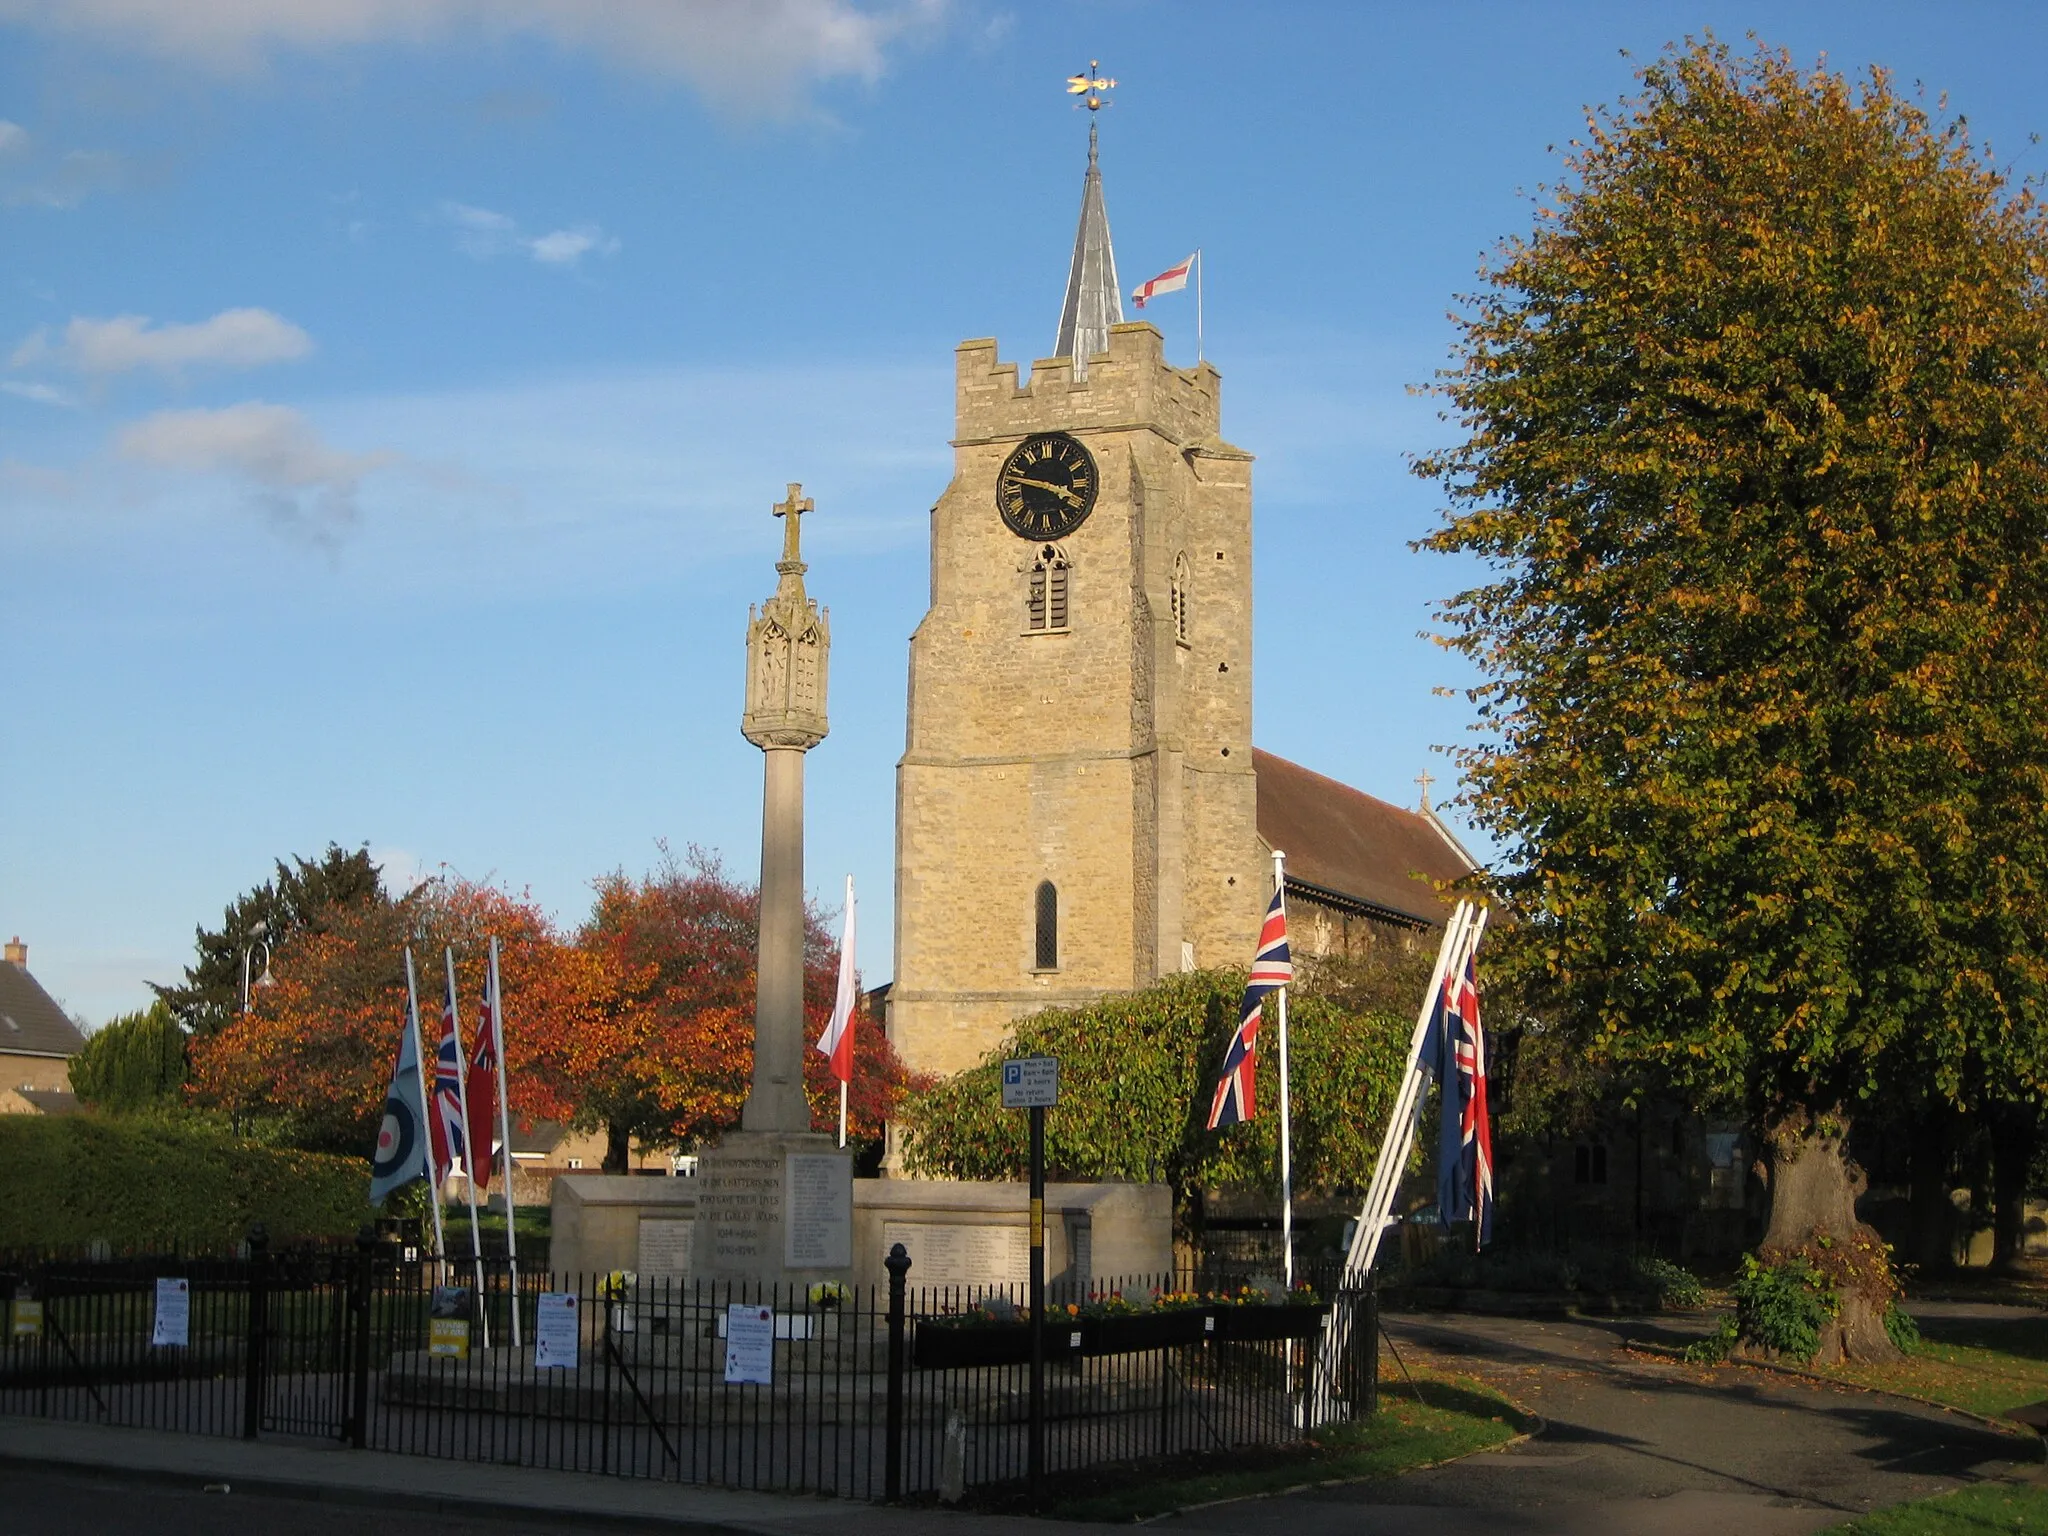 Photo showing: St Peter & St Paul's church, Chatteris, Cambridgeshire. The war memorial in the foreground has been prepared for Remembrance Sunday.